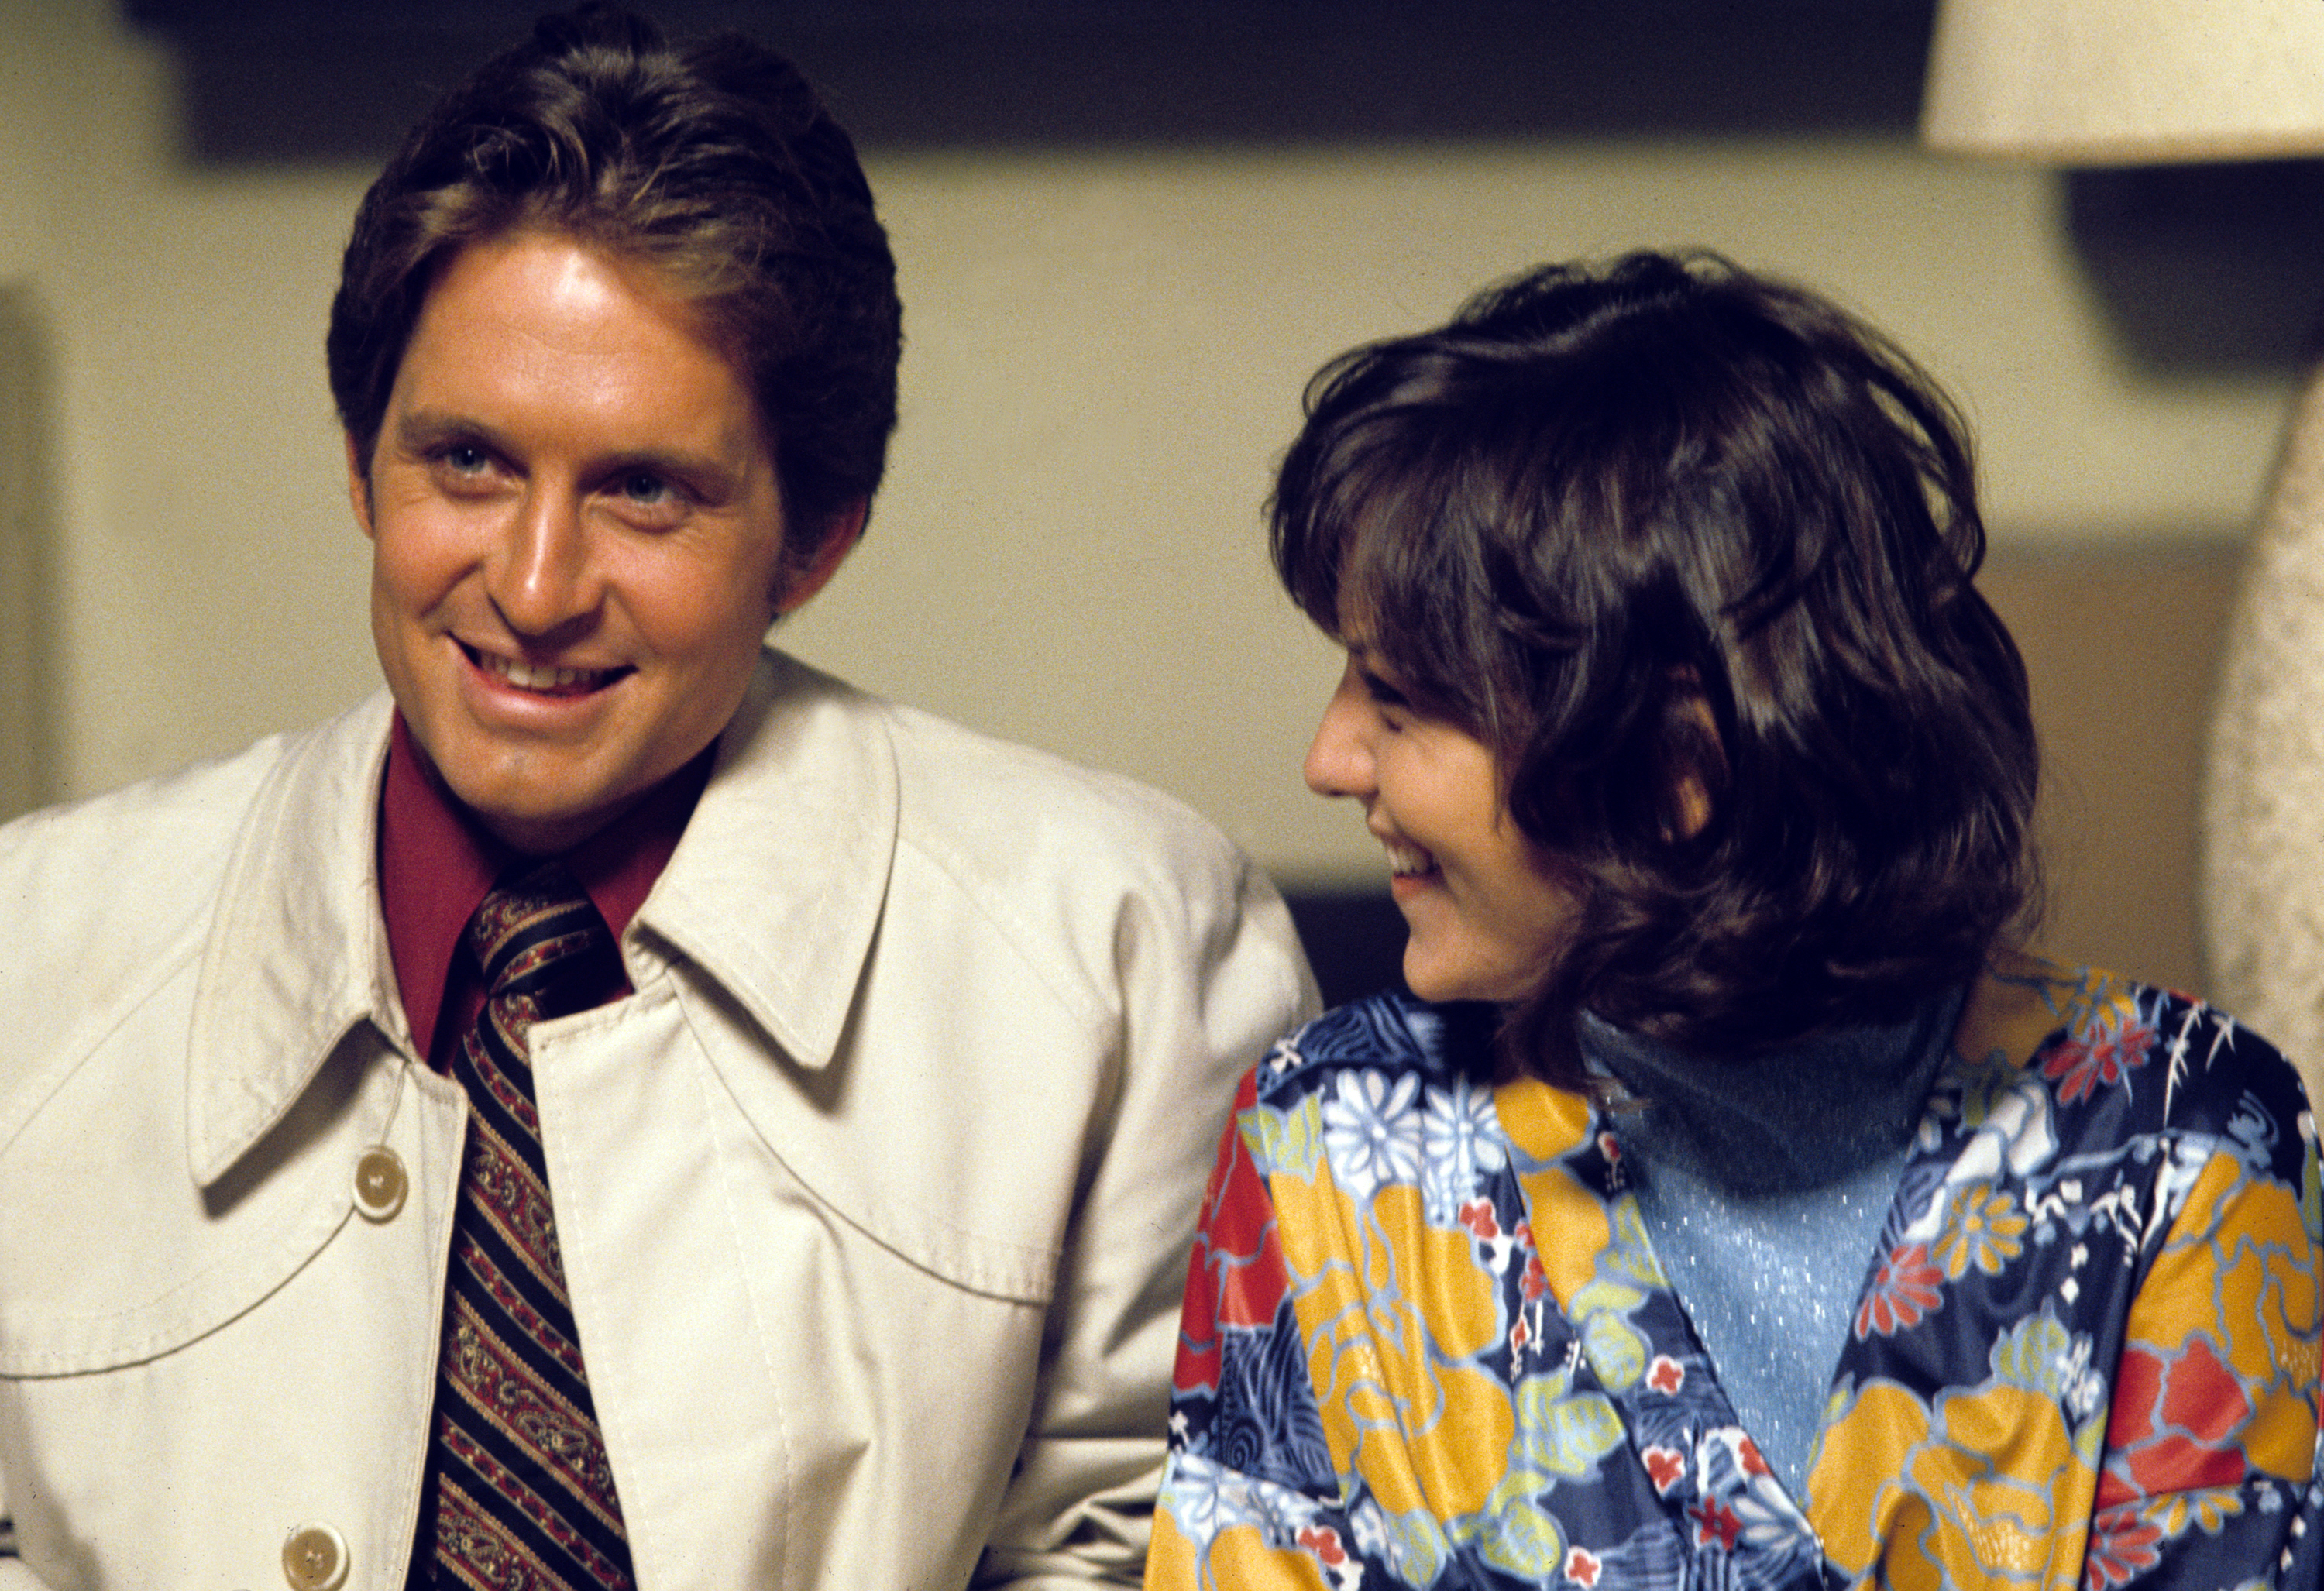 Michael Douglas as Keller and Brenda Vaccaro as Officer Sherry Reese in "The Streets of San Francisco" on January 18, 1973. | Source: Getty Images